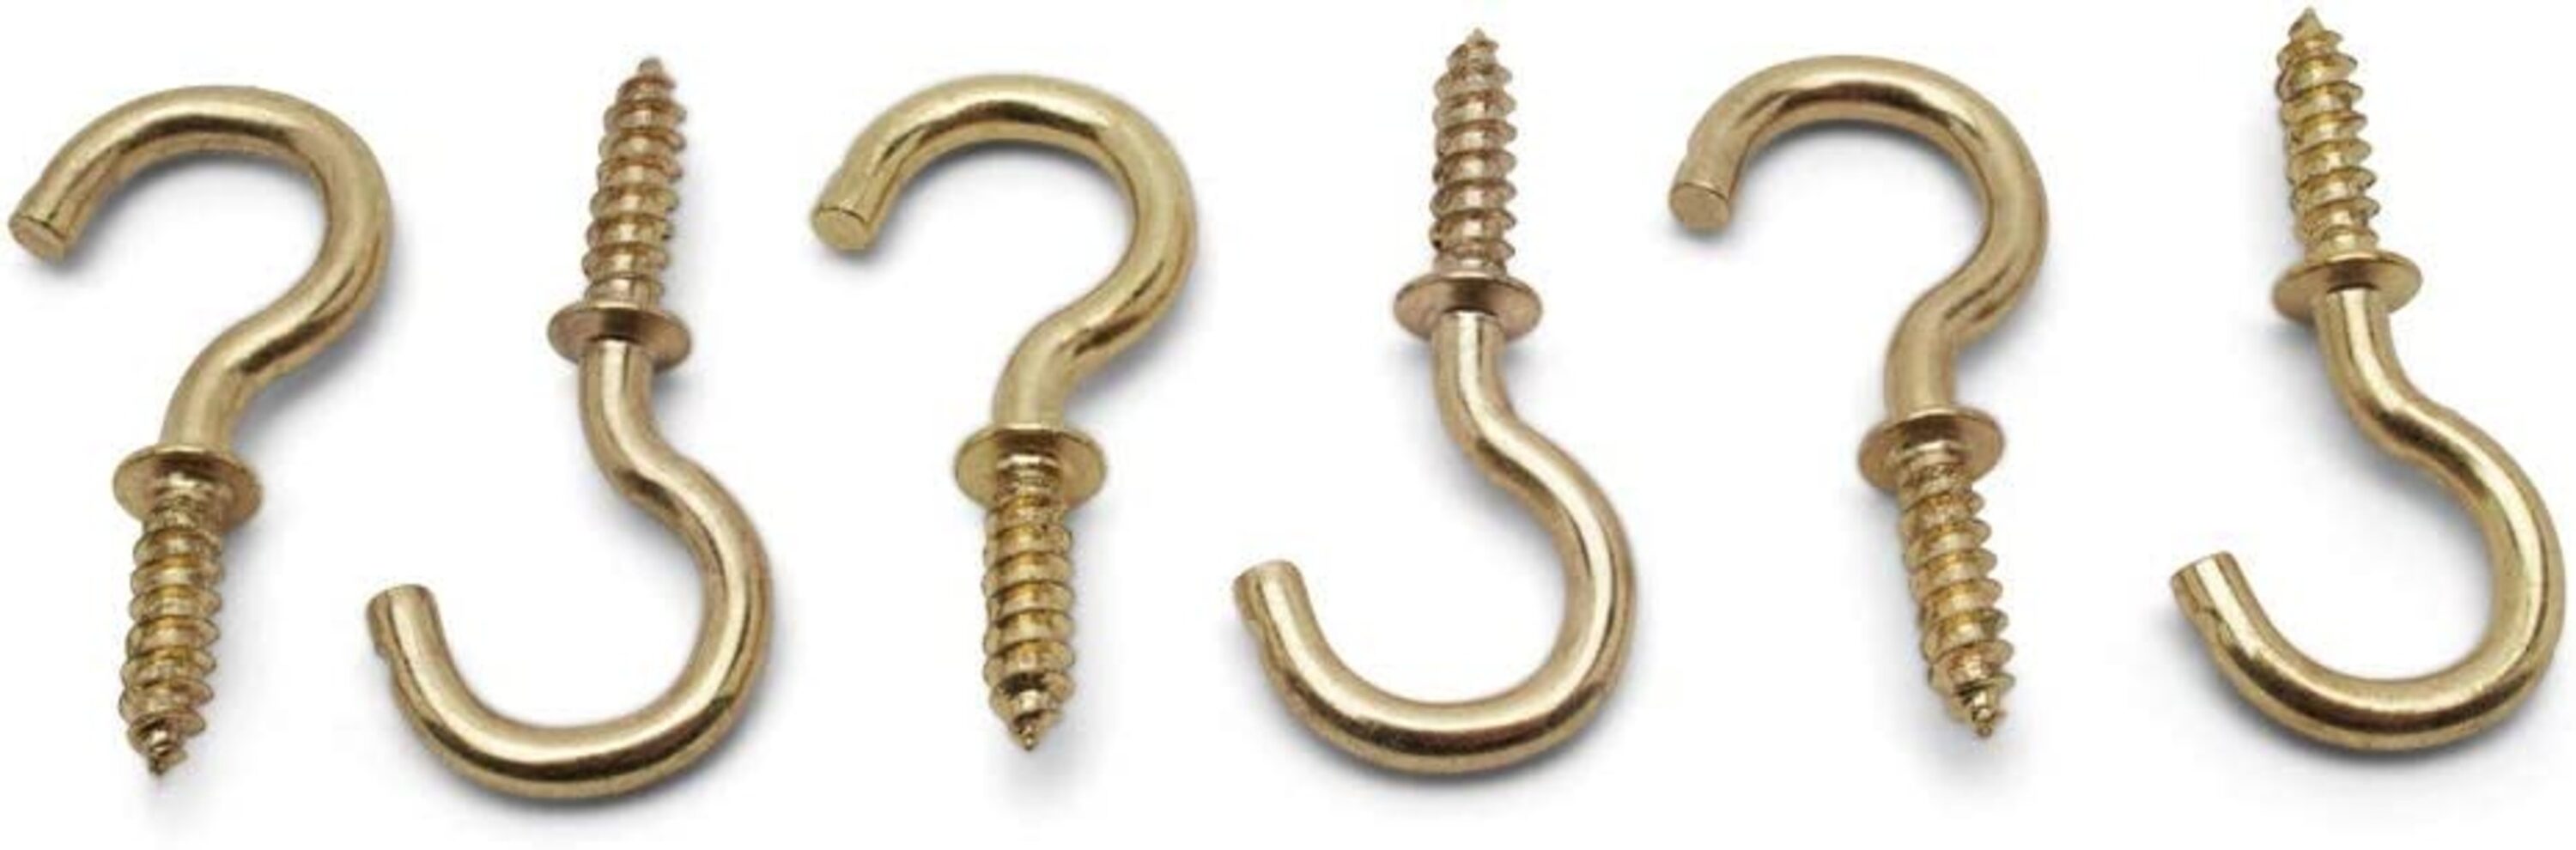 Cup Hooks Screw in 1/2 inch, Pack of 250 Mini Screw in Hooks for Hanging, by Woodpeckers